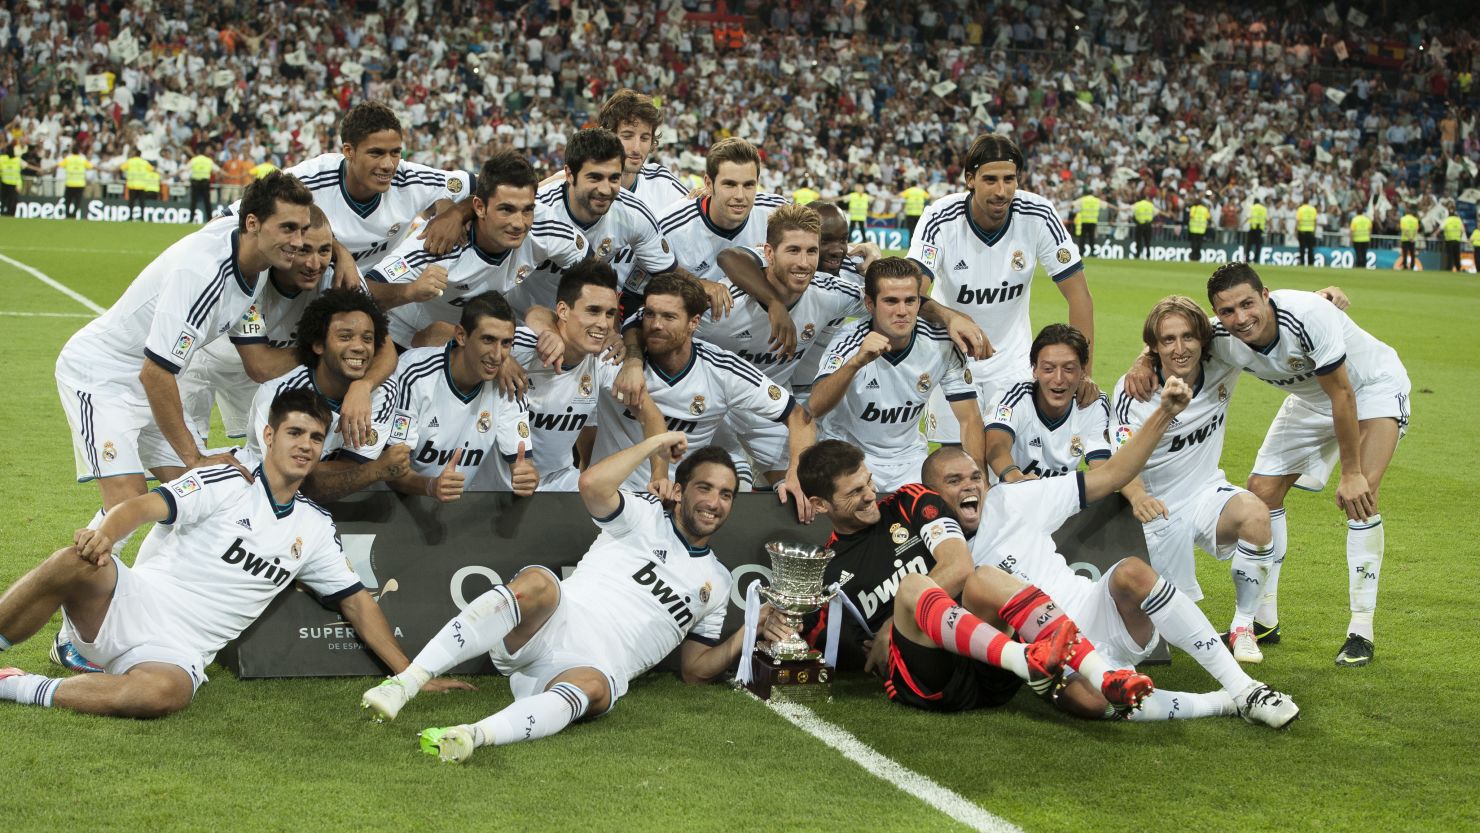 Real Madrid players celebrate their Supercup win over rivals Barcelona